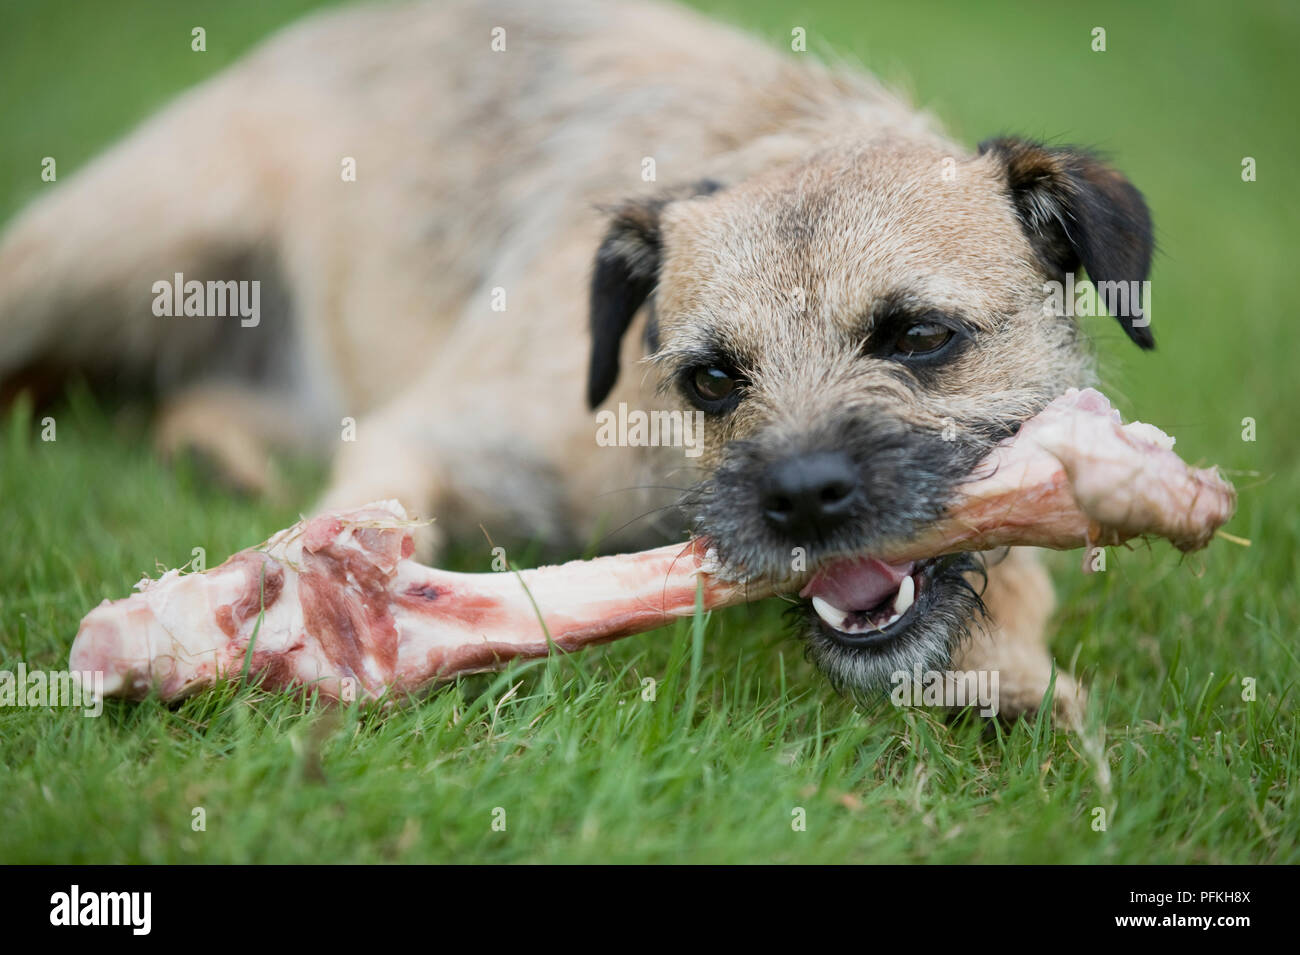 Border Terrier chewing on a raw bone, front view Stock Photo